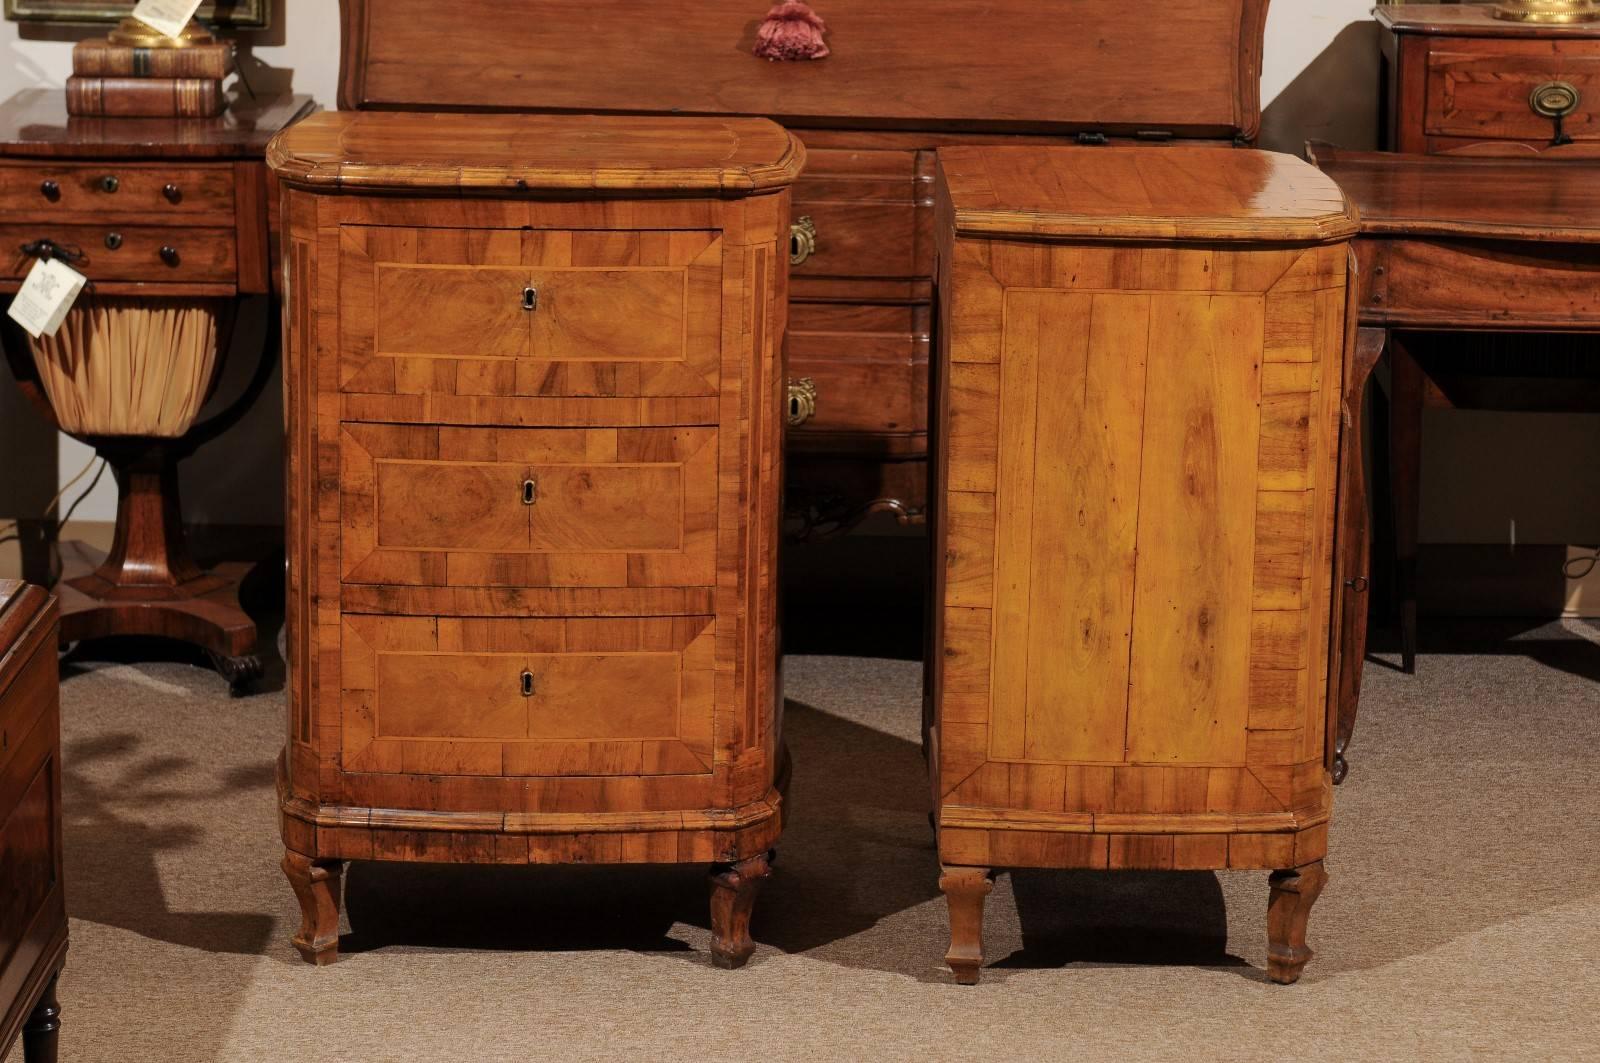 A pair of Italian matched walnut inlaid commodinis. One commodini with three drawers and the other with one drawer and cabinet. 

1. Commode is 22